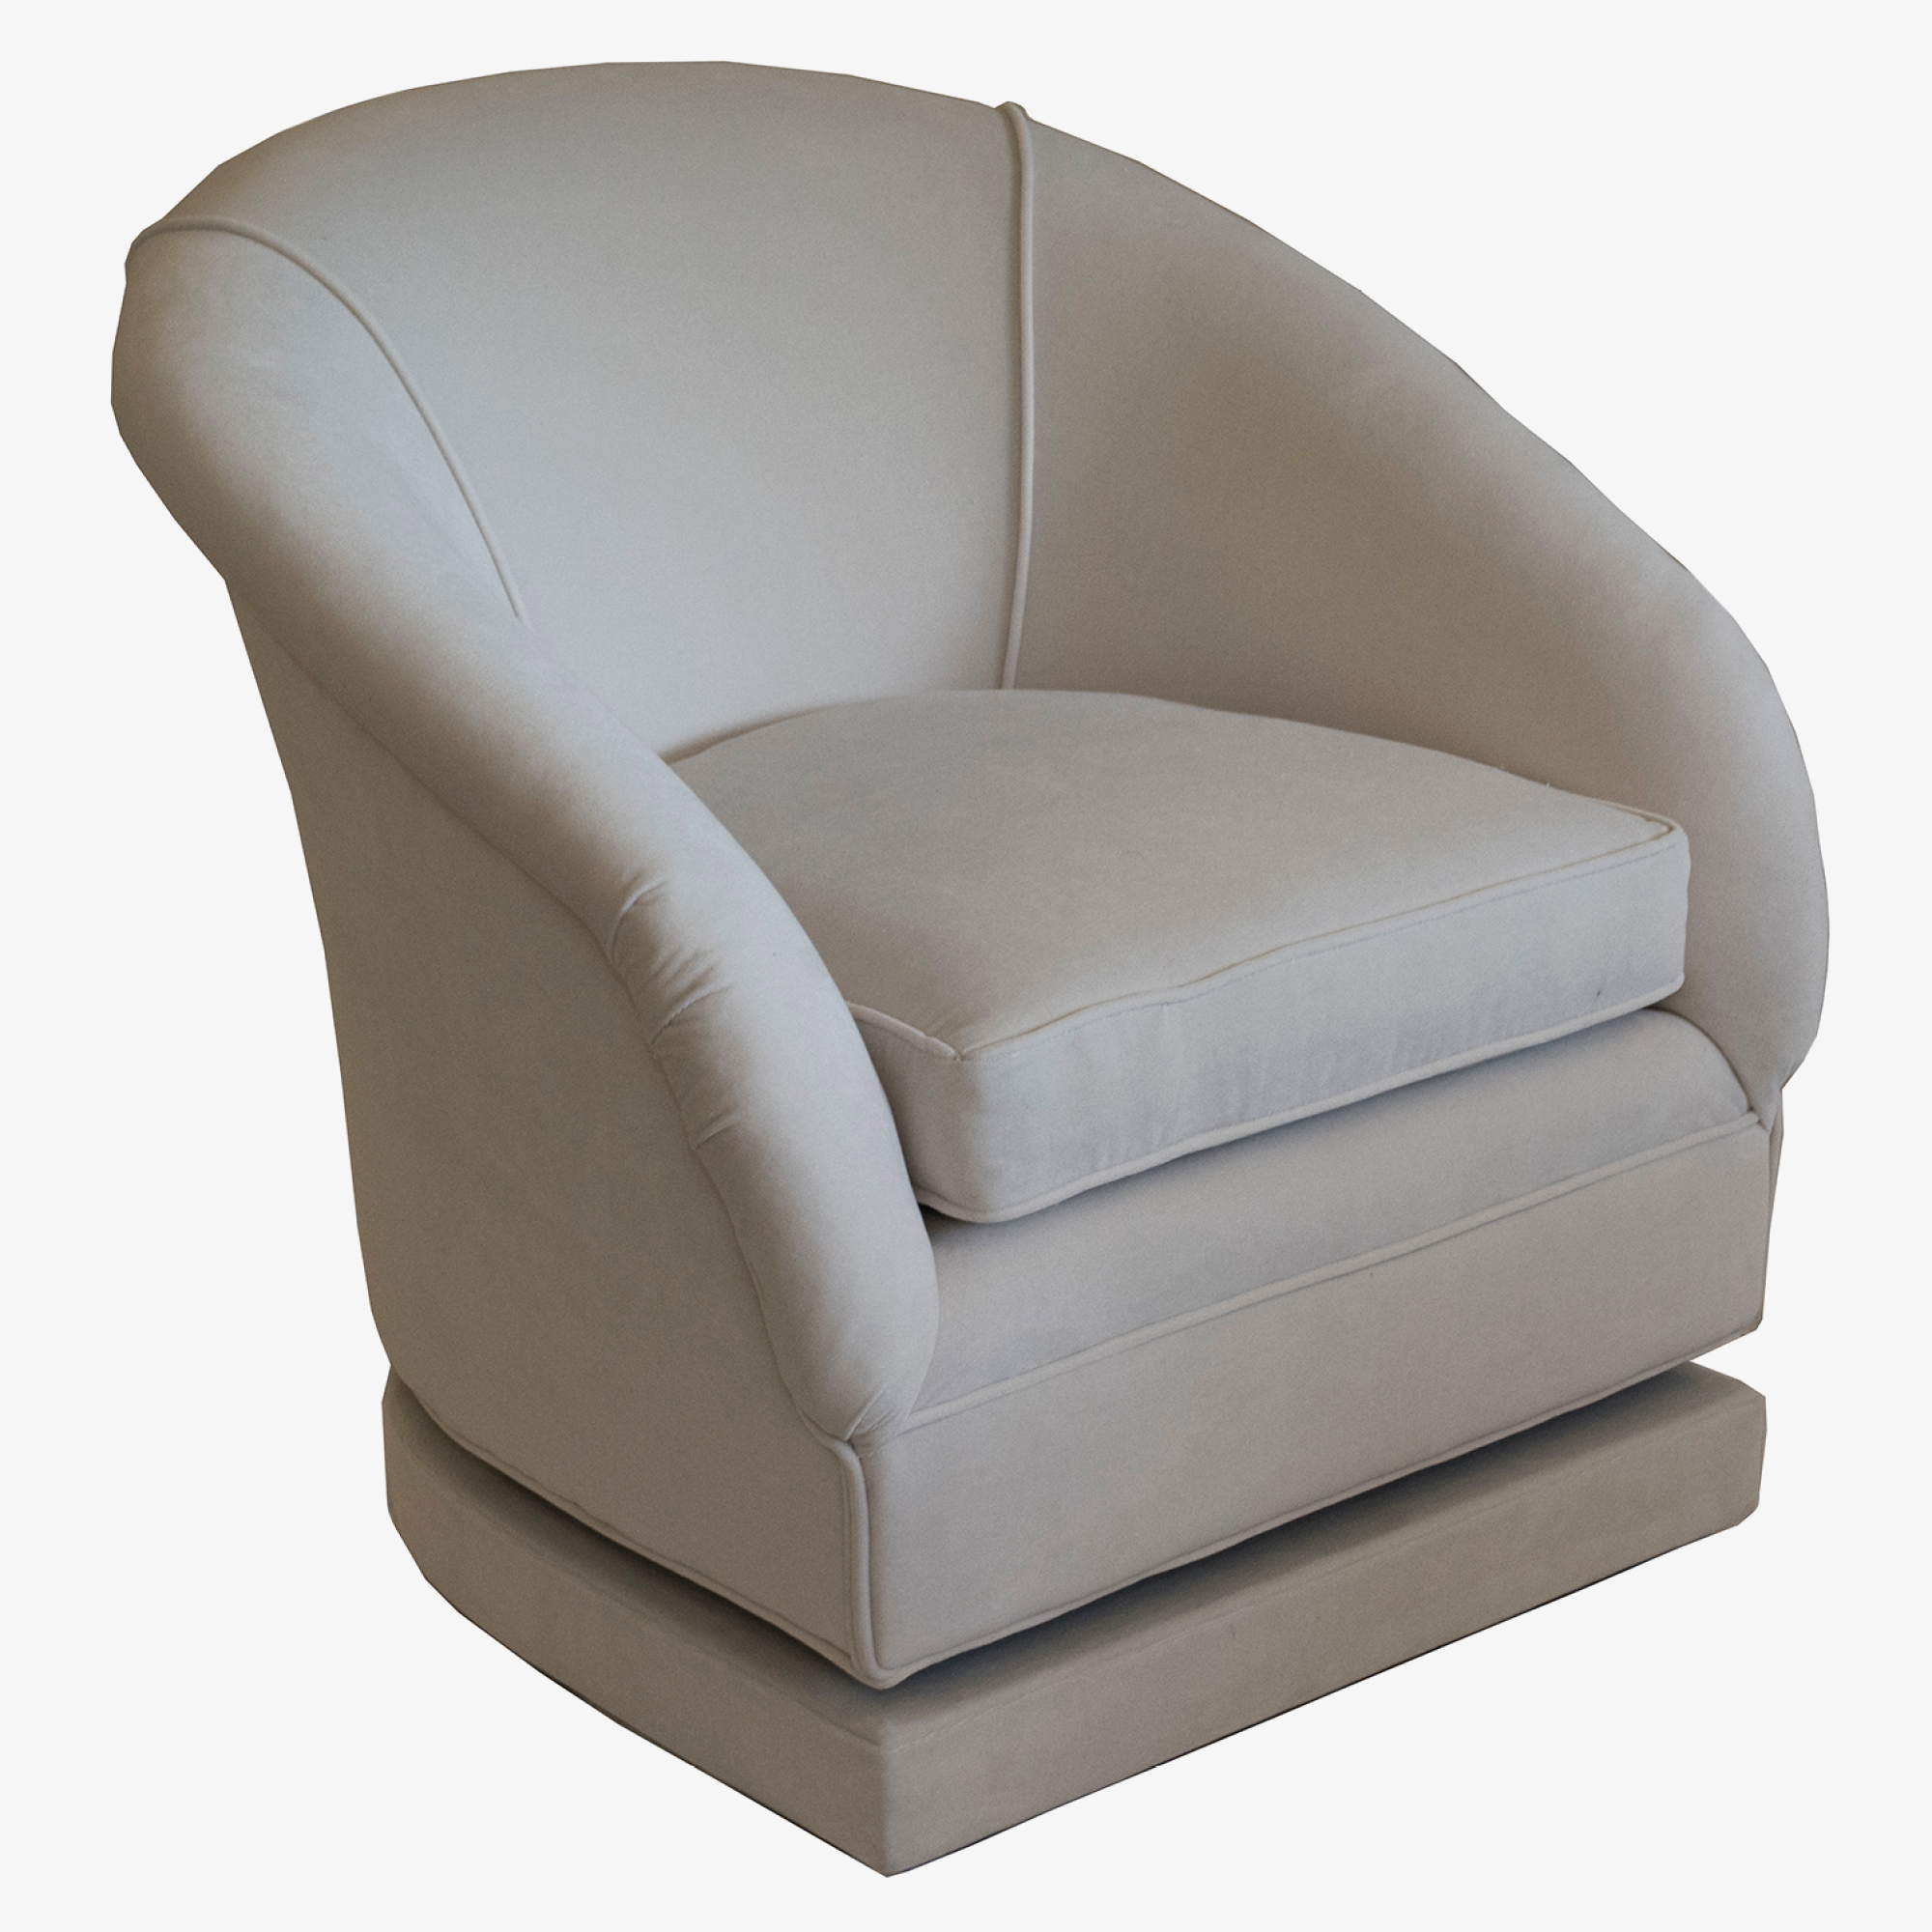 Bespoke Set of Swivel Chairs with Custom Ottoman 5.png